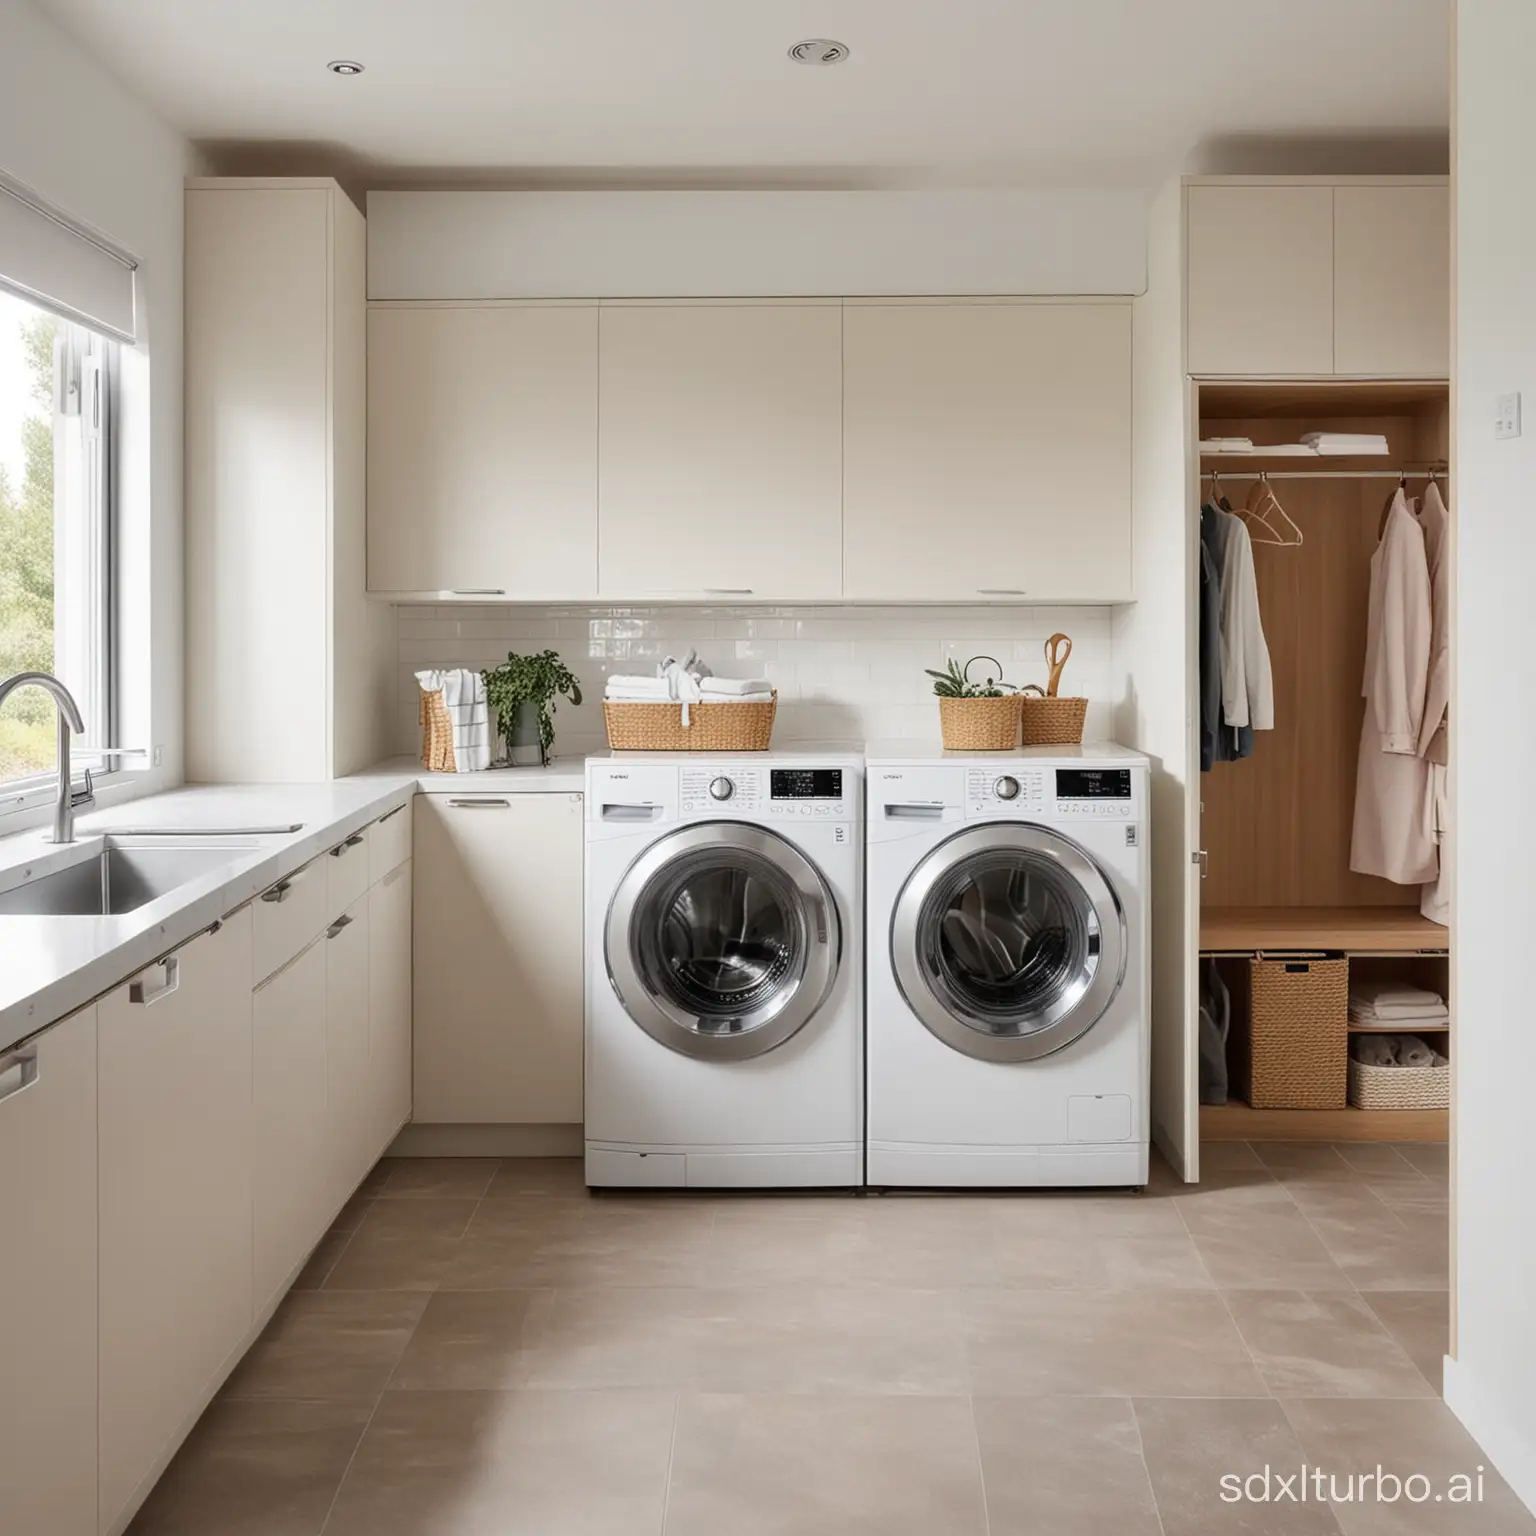 In modern laundry rooms, only the front angle of two washing machines can be seen.